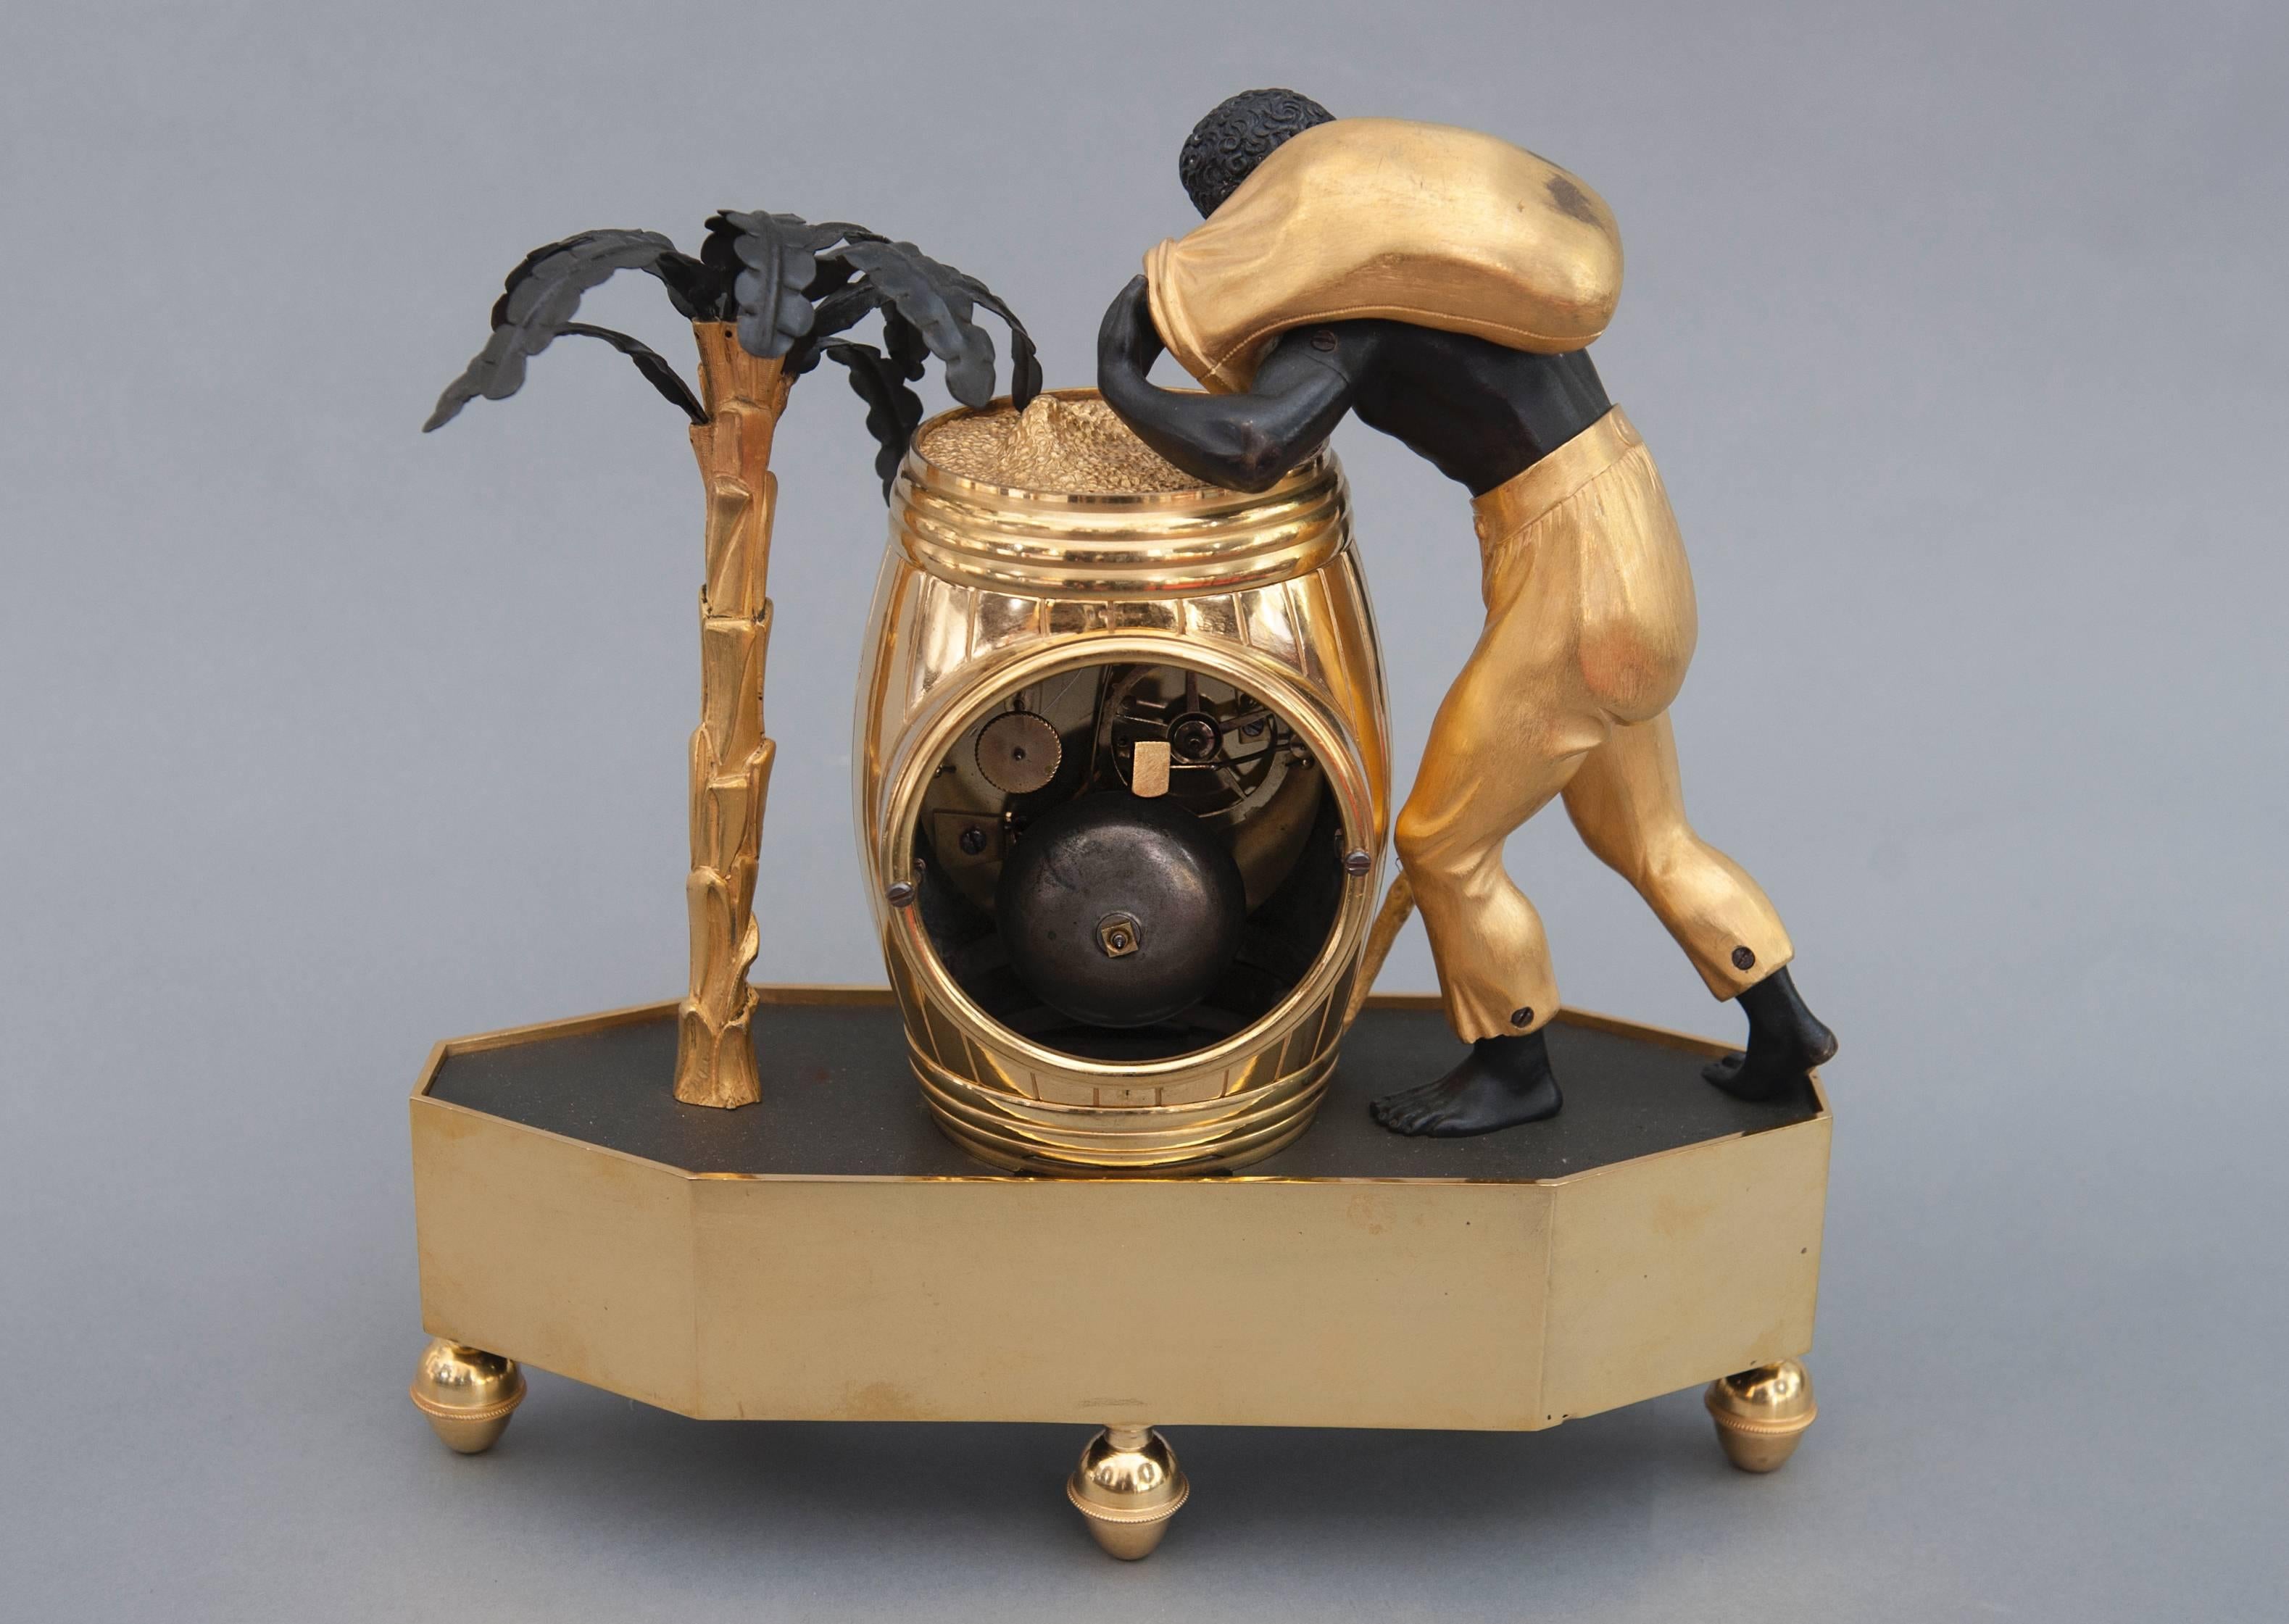 A very rare pendule 'Au Bon Sauvage' symbolizing the man filling the drum with (possibly) coffee beans, circa 1800.

These pendule clocks from this short 